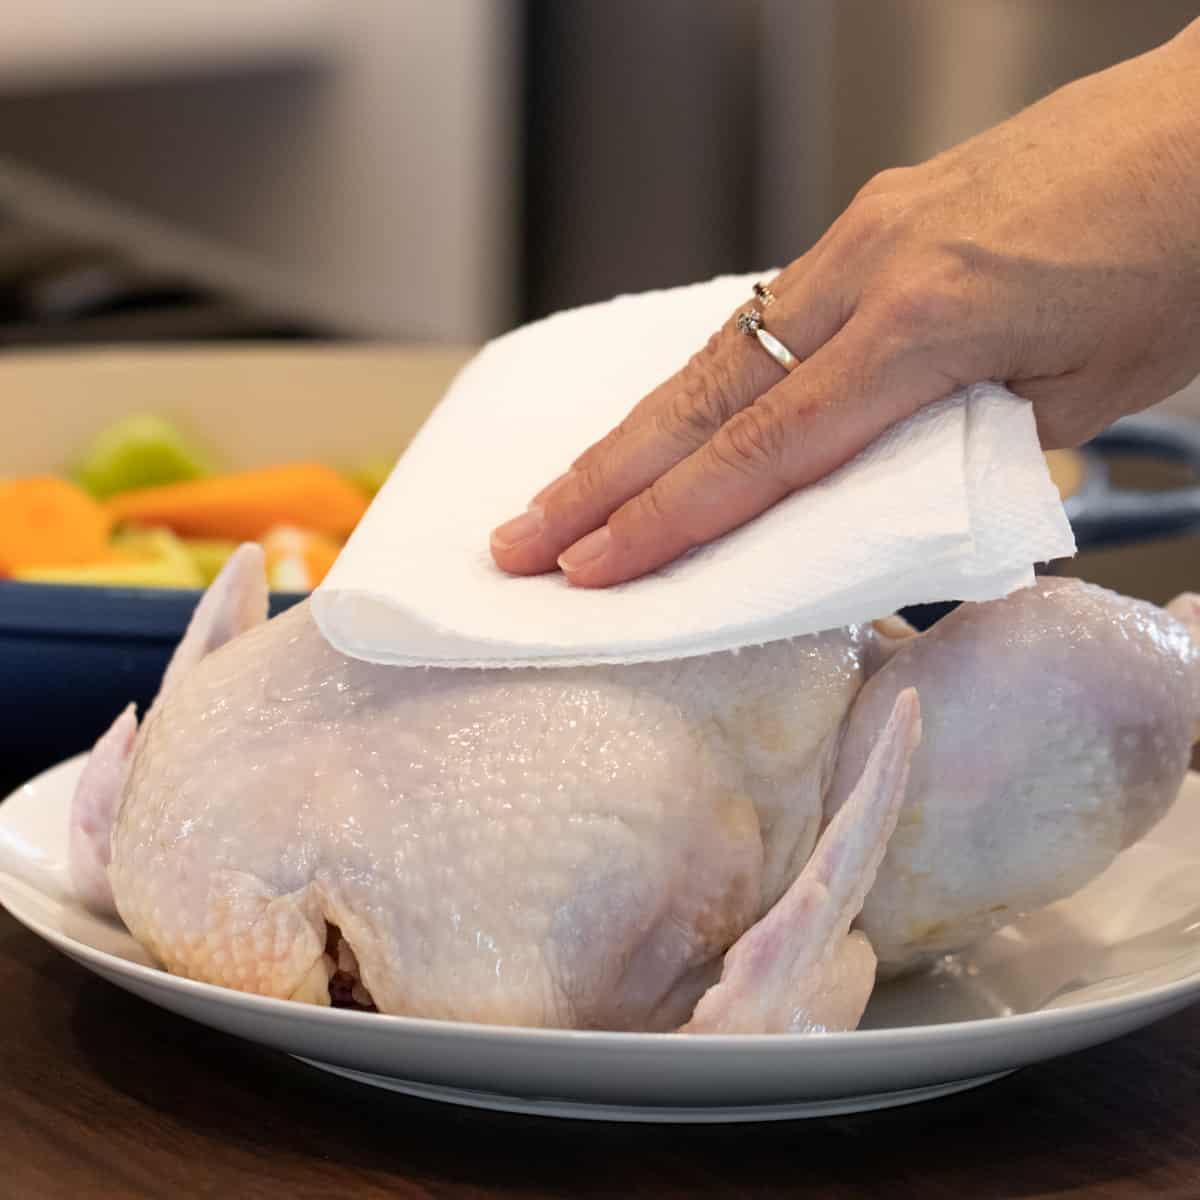 Patting a chicken with a paper towel.